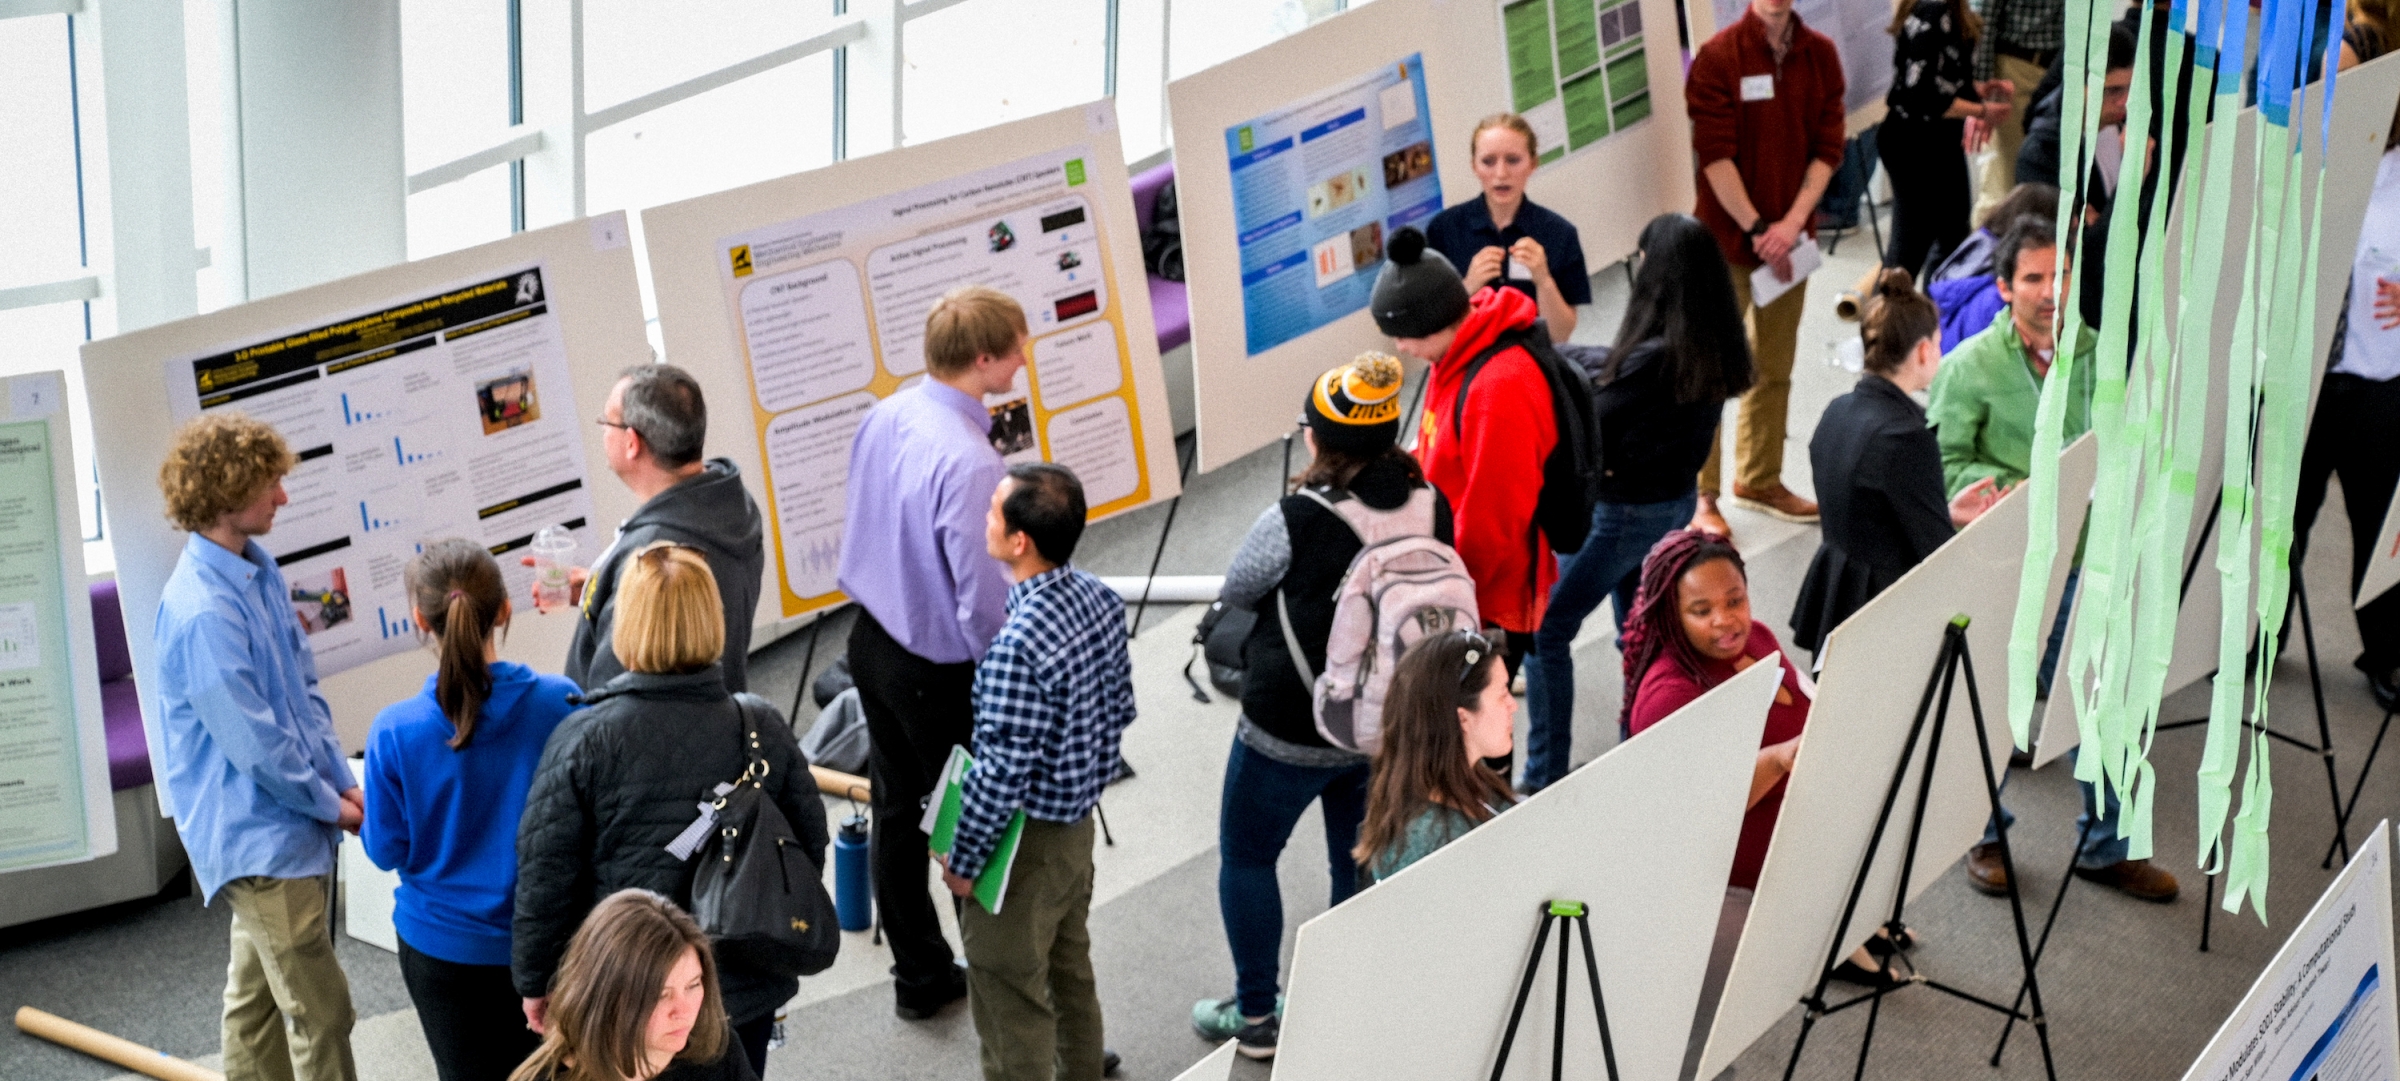 Students and faculty mix at the Undergraduate Research Symposium.